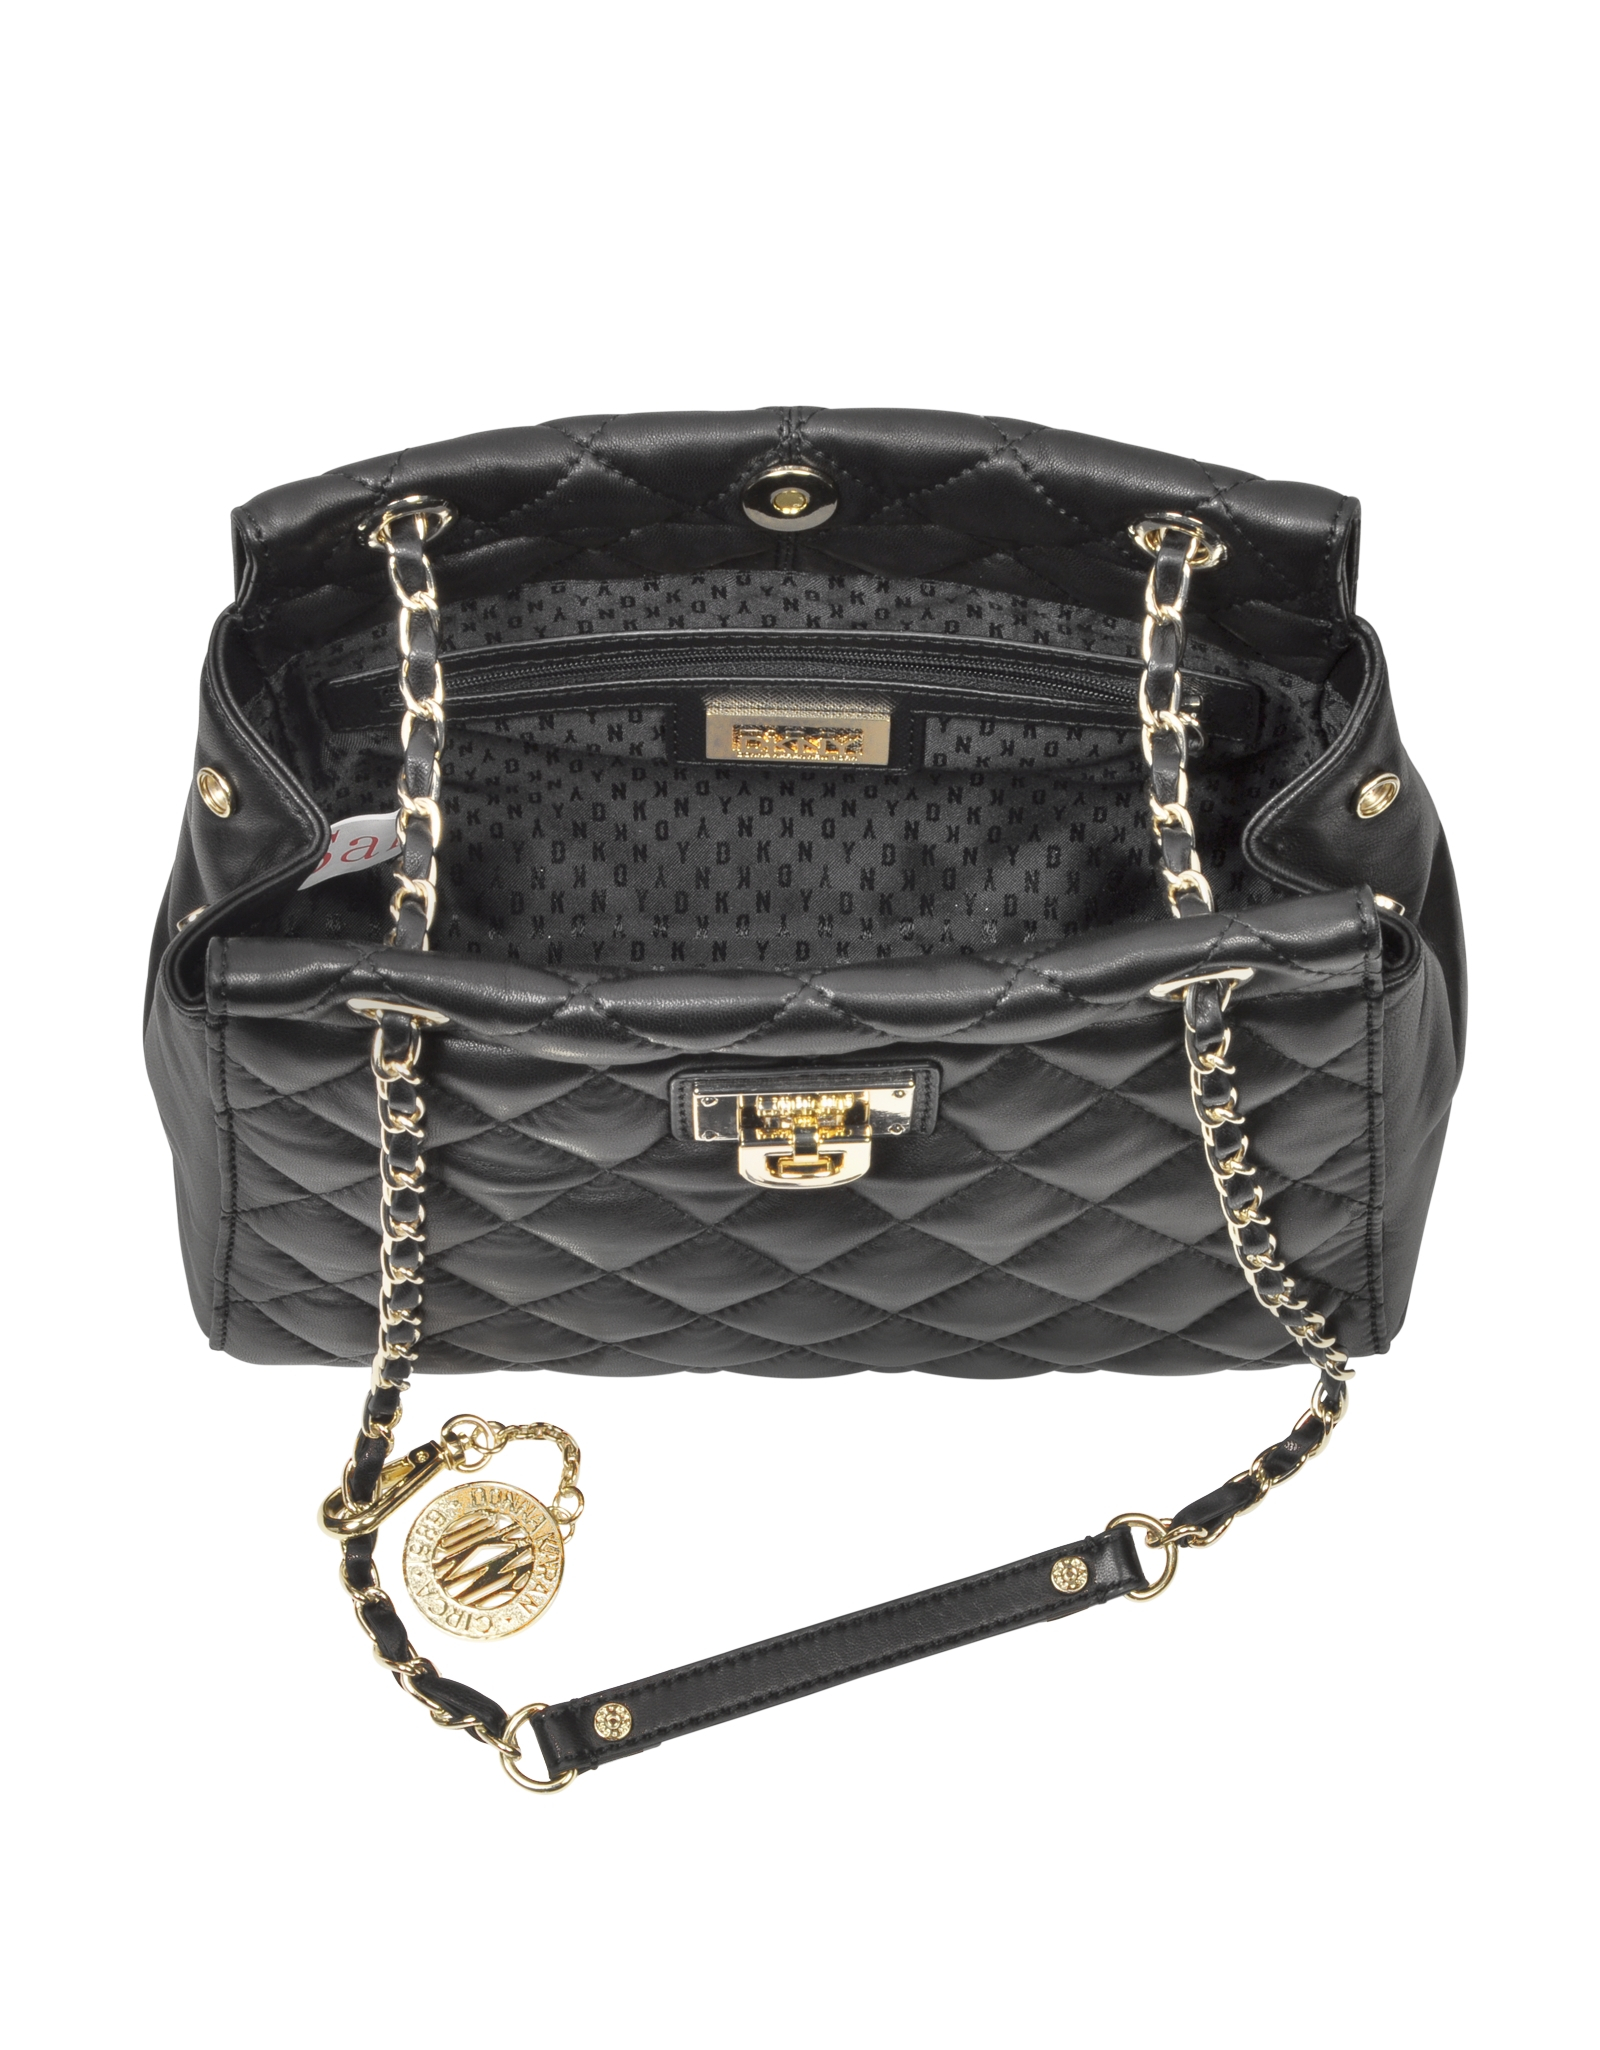 DKNY Gansevoort Quilted Nappa Large Snap Crossbody Bag in Black - Lyst